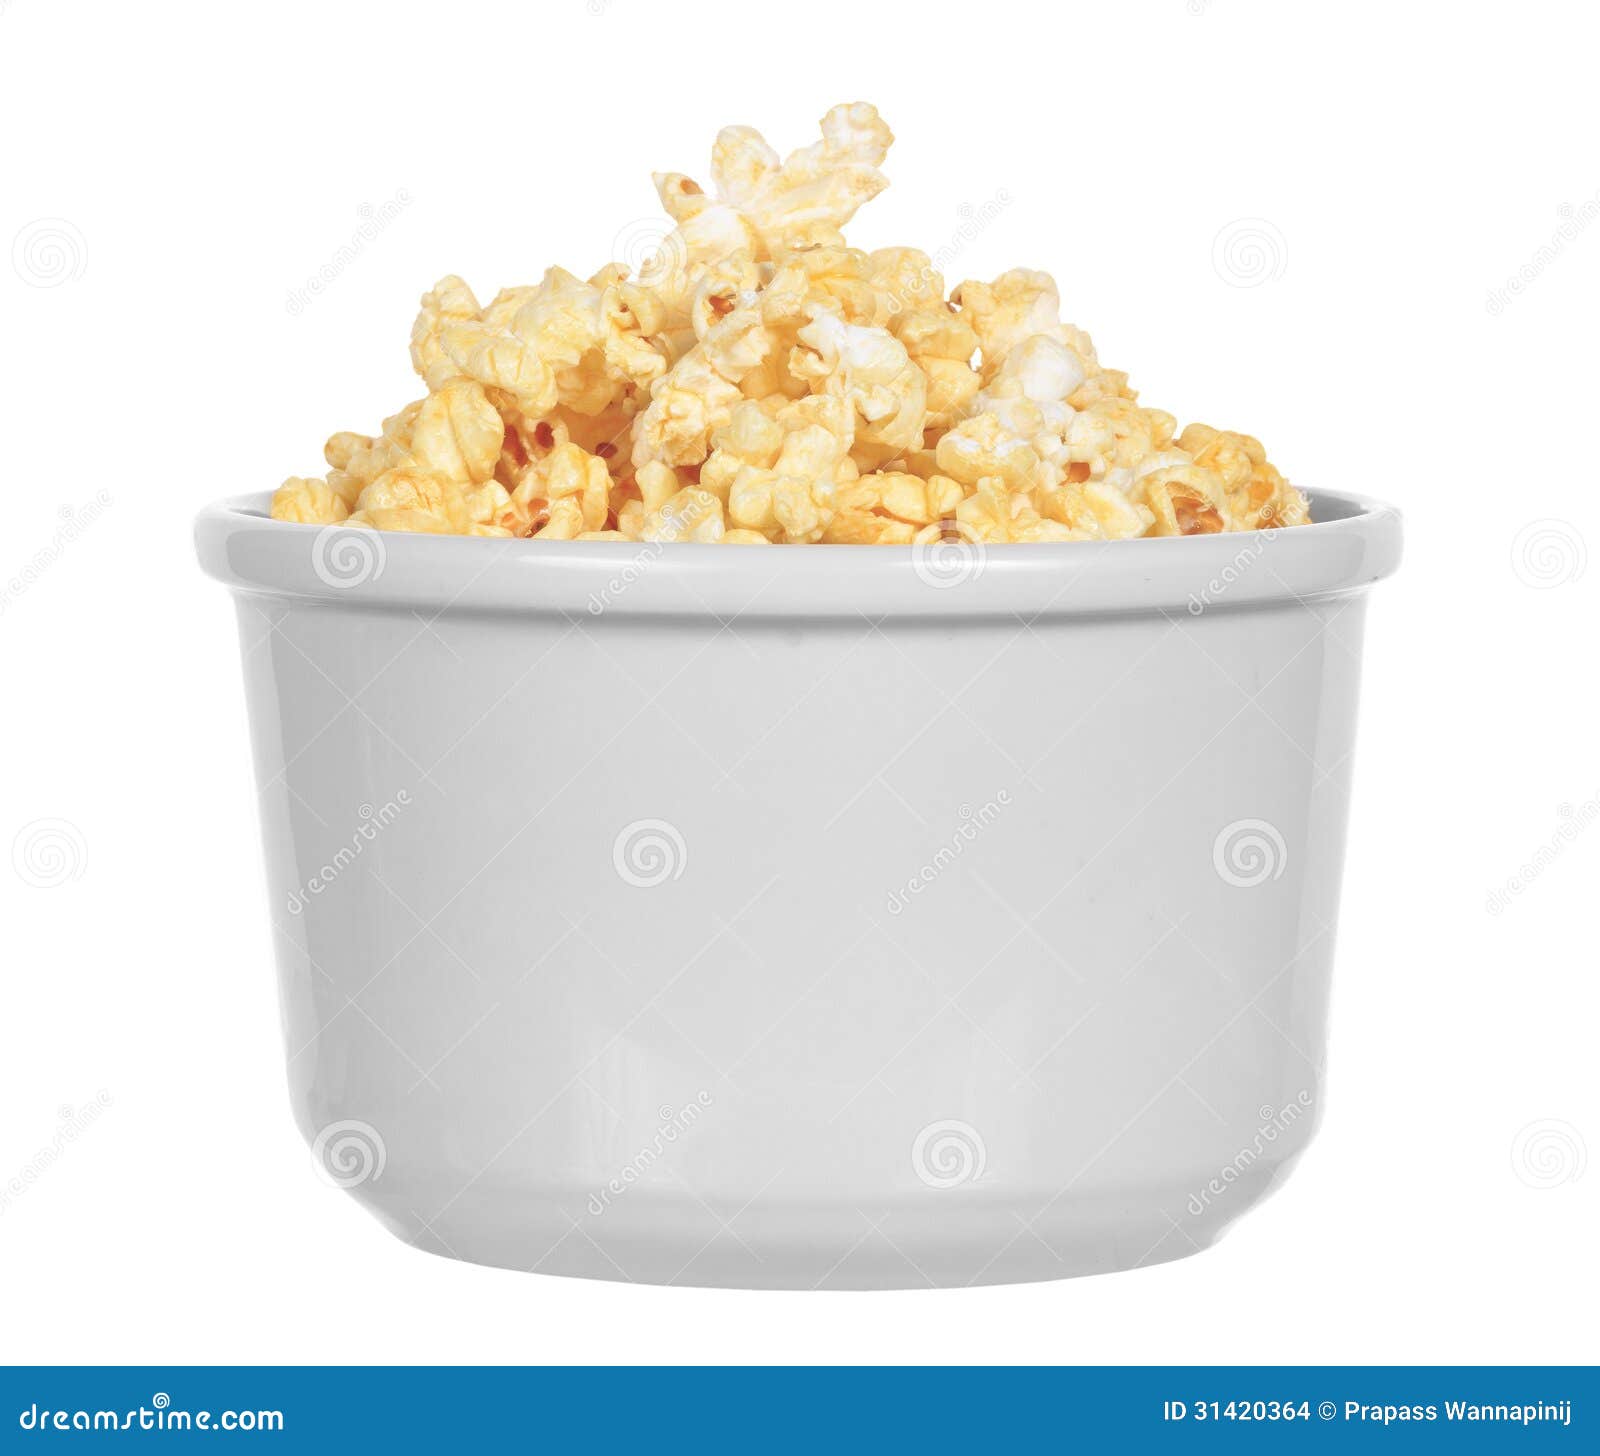 bowl of buttery popcorn 